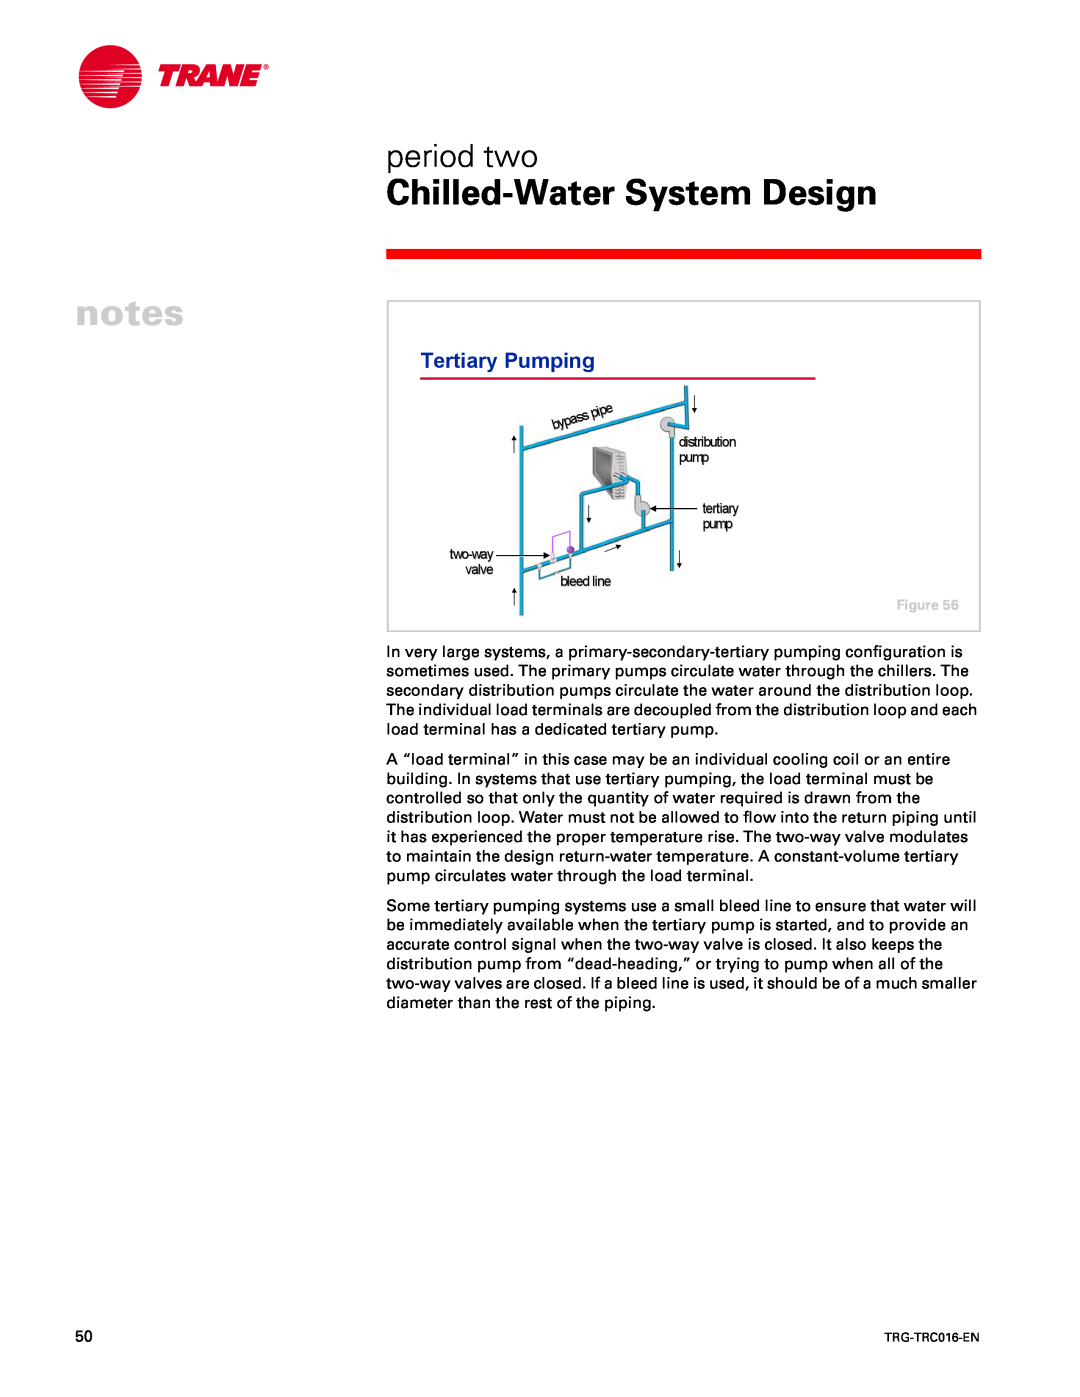 Trane TRG-TRC016-EN manual Tertiary Pumping, notes, Chilled-WaterSystem Design, period two, bleedline 